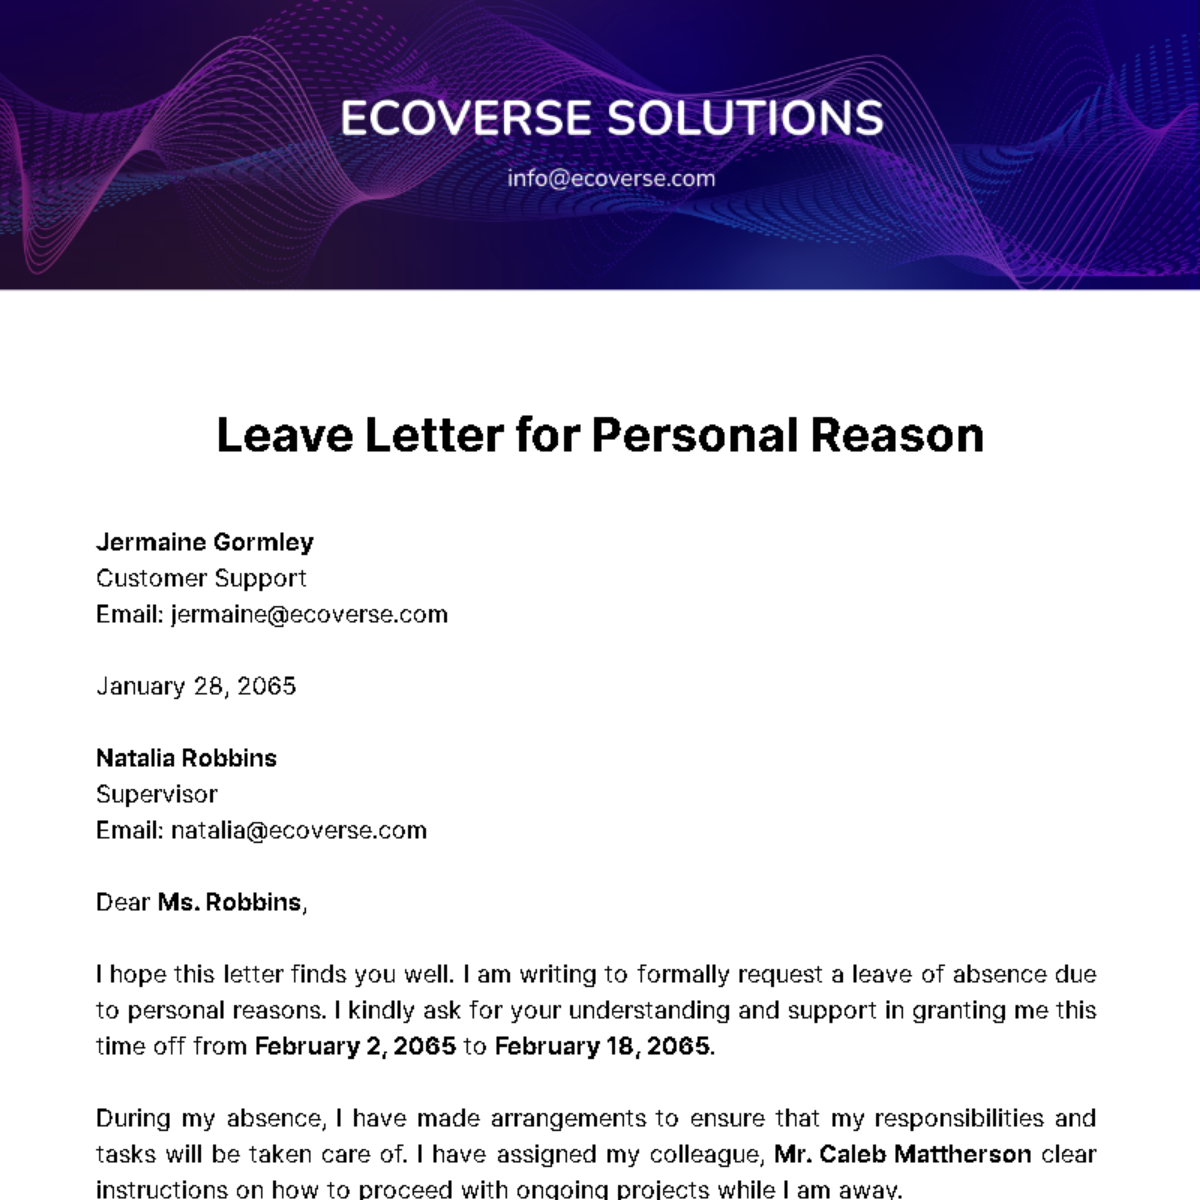 Leave Letter for Personal Reason Template